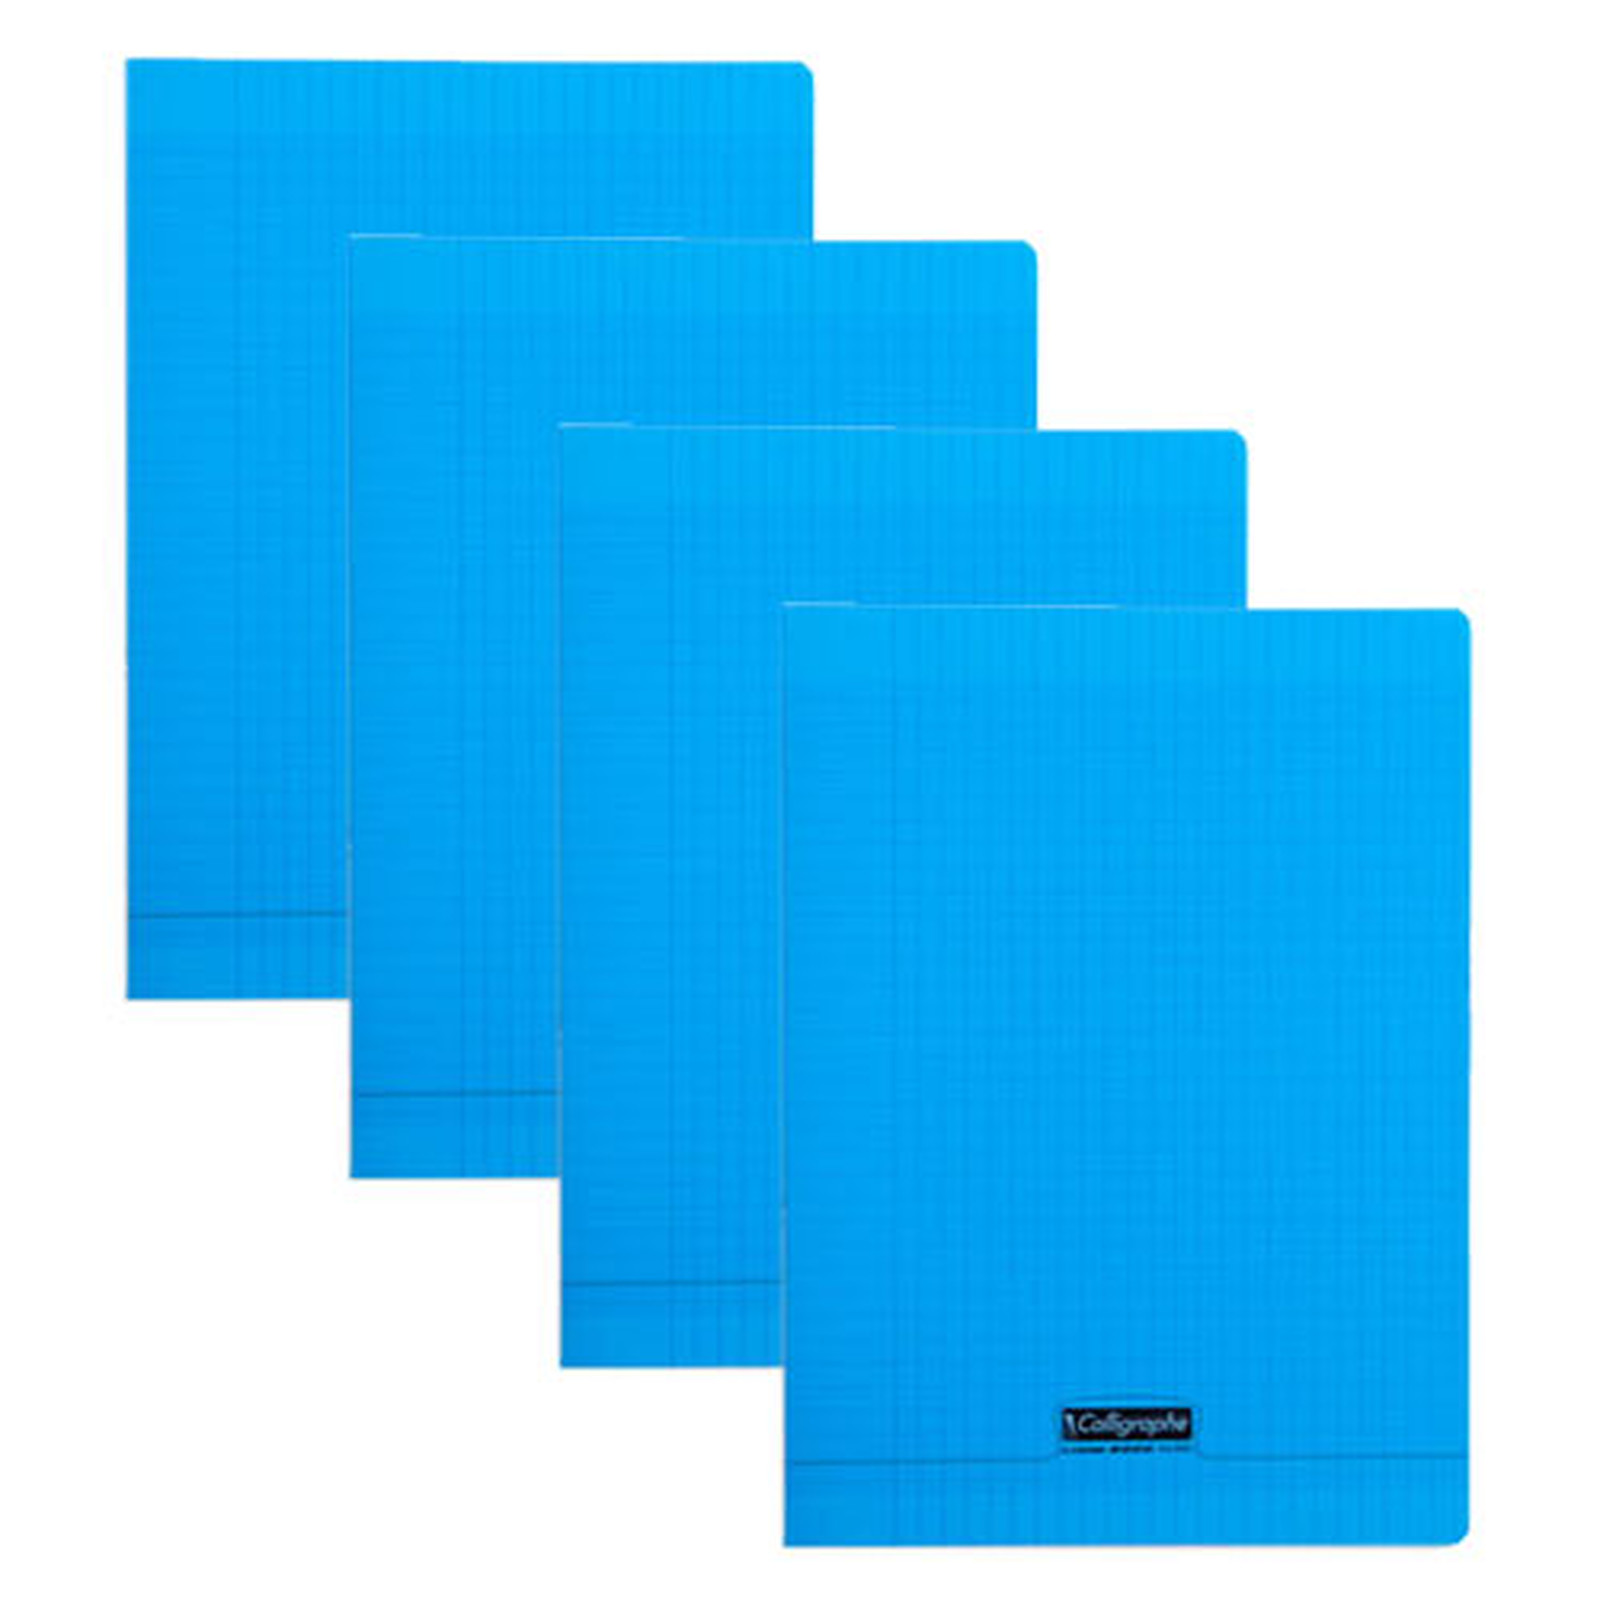 Calligraphe 8000 Polypro Cahier 96 pages 24 x 32 cm seyes Bleu x 40 + 10 OFFERTS ! - Cahier Calligraphe